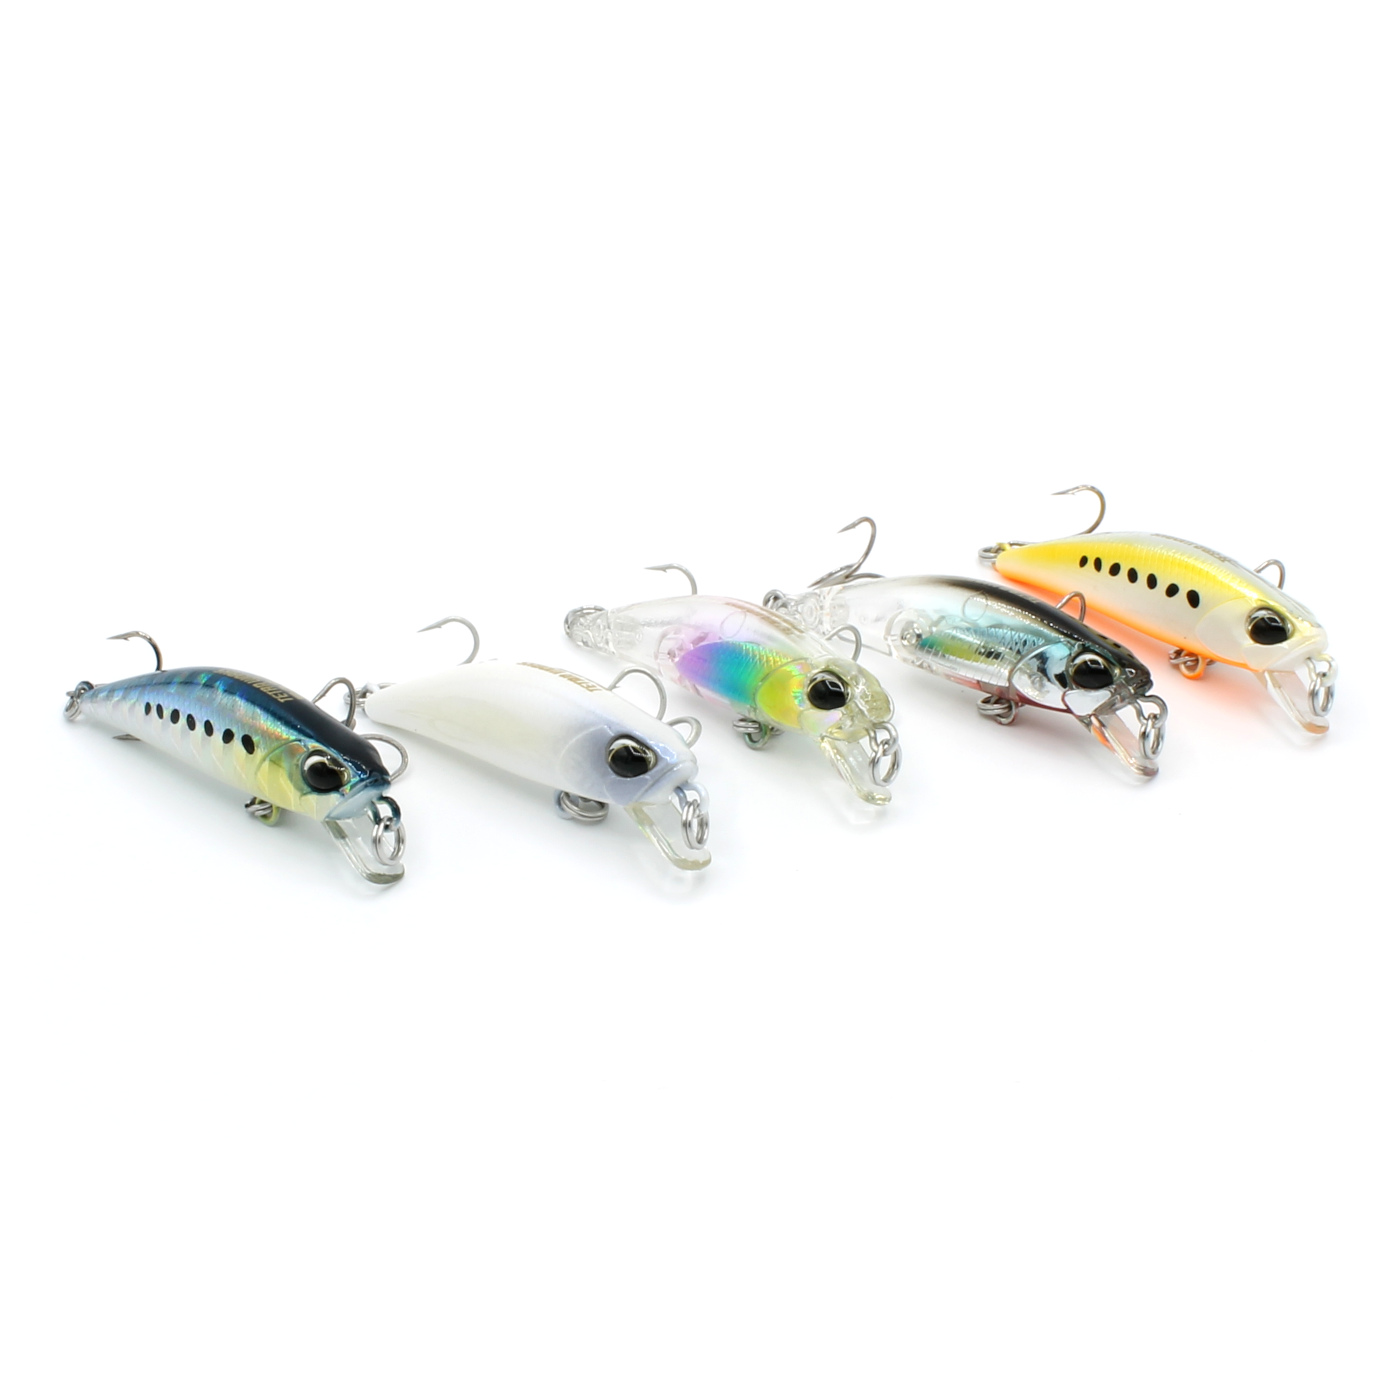 DUO Tetra Works Toto 42 Mm Sinking Lure Ada0213-5864 for sale online 